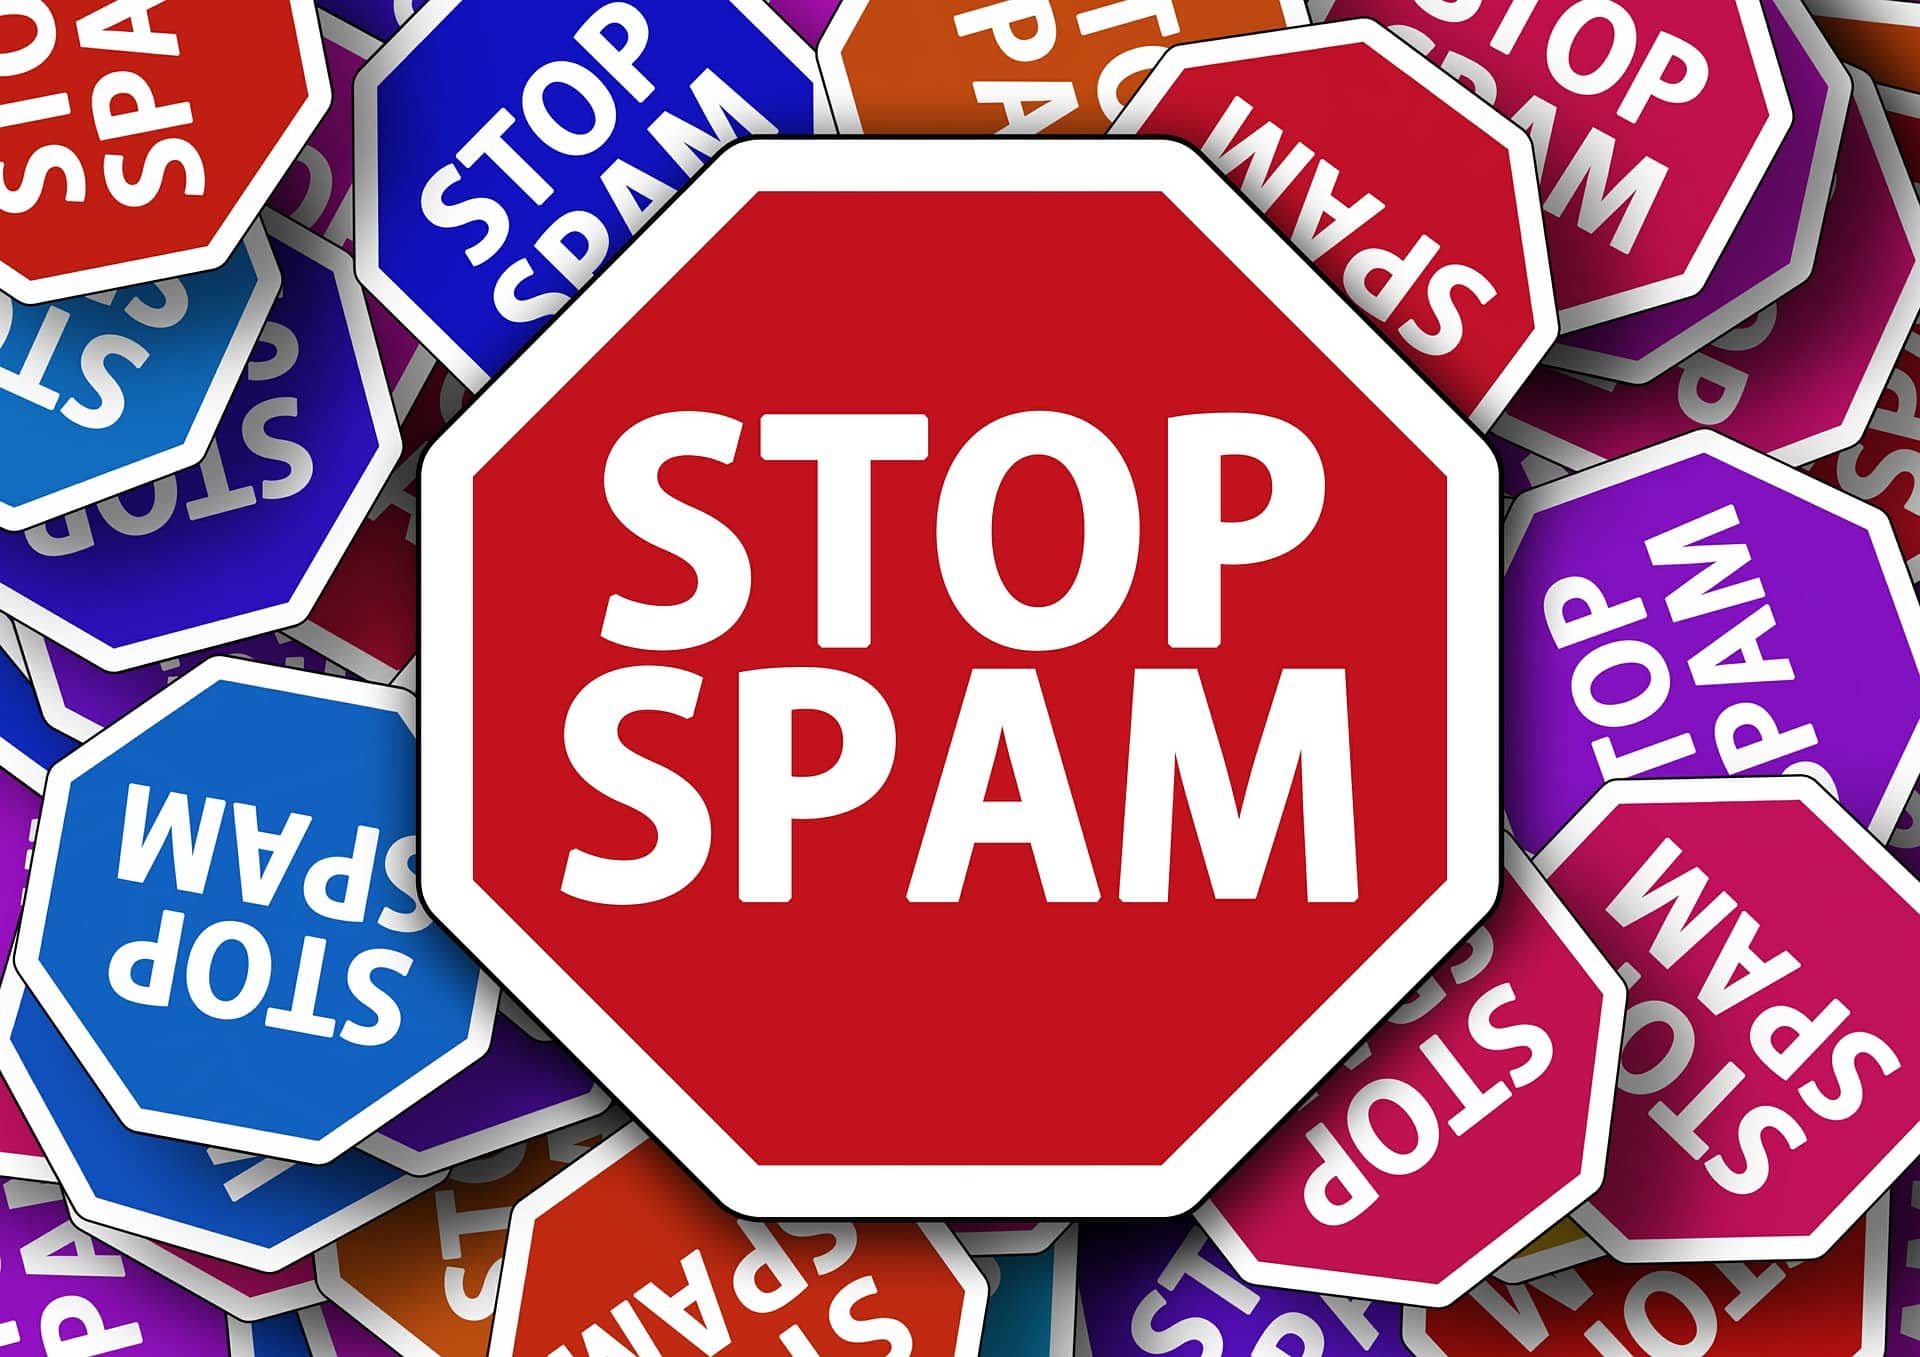 Crafty email spammers and how to avoid them